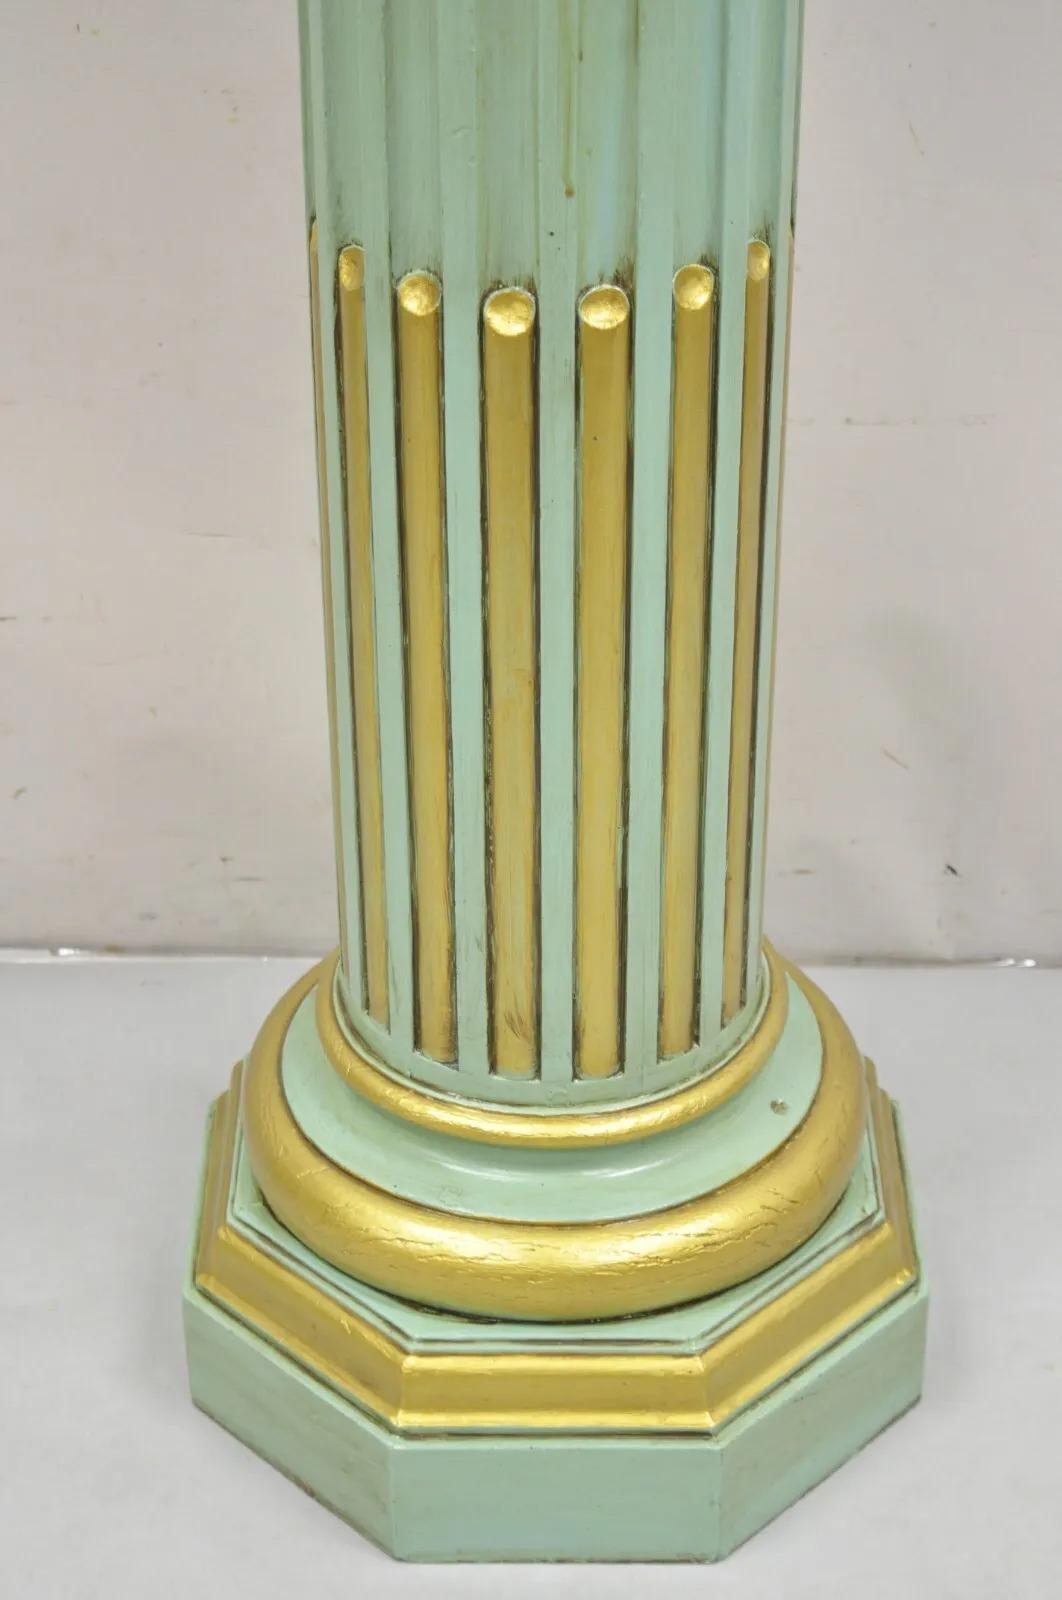 Antique Italian Neoclassical / French Empire Style Green & Gold Painted Carved Wood Column Pedestal. Circa 1900, (painted finish appears to be a vintage addition) Measurements:  Overall: 47